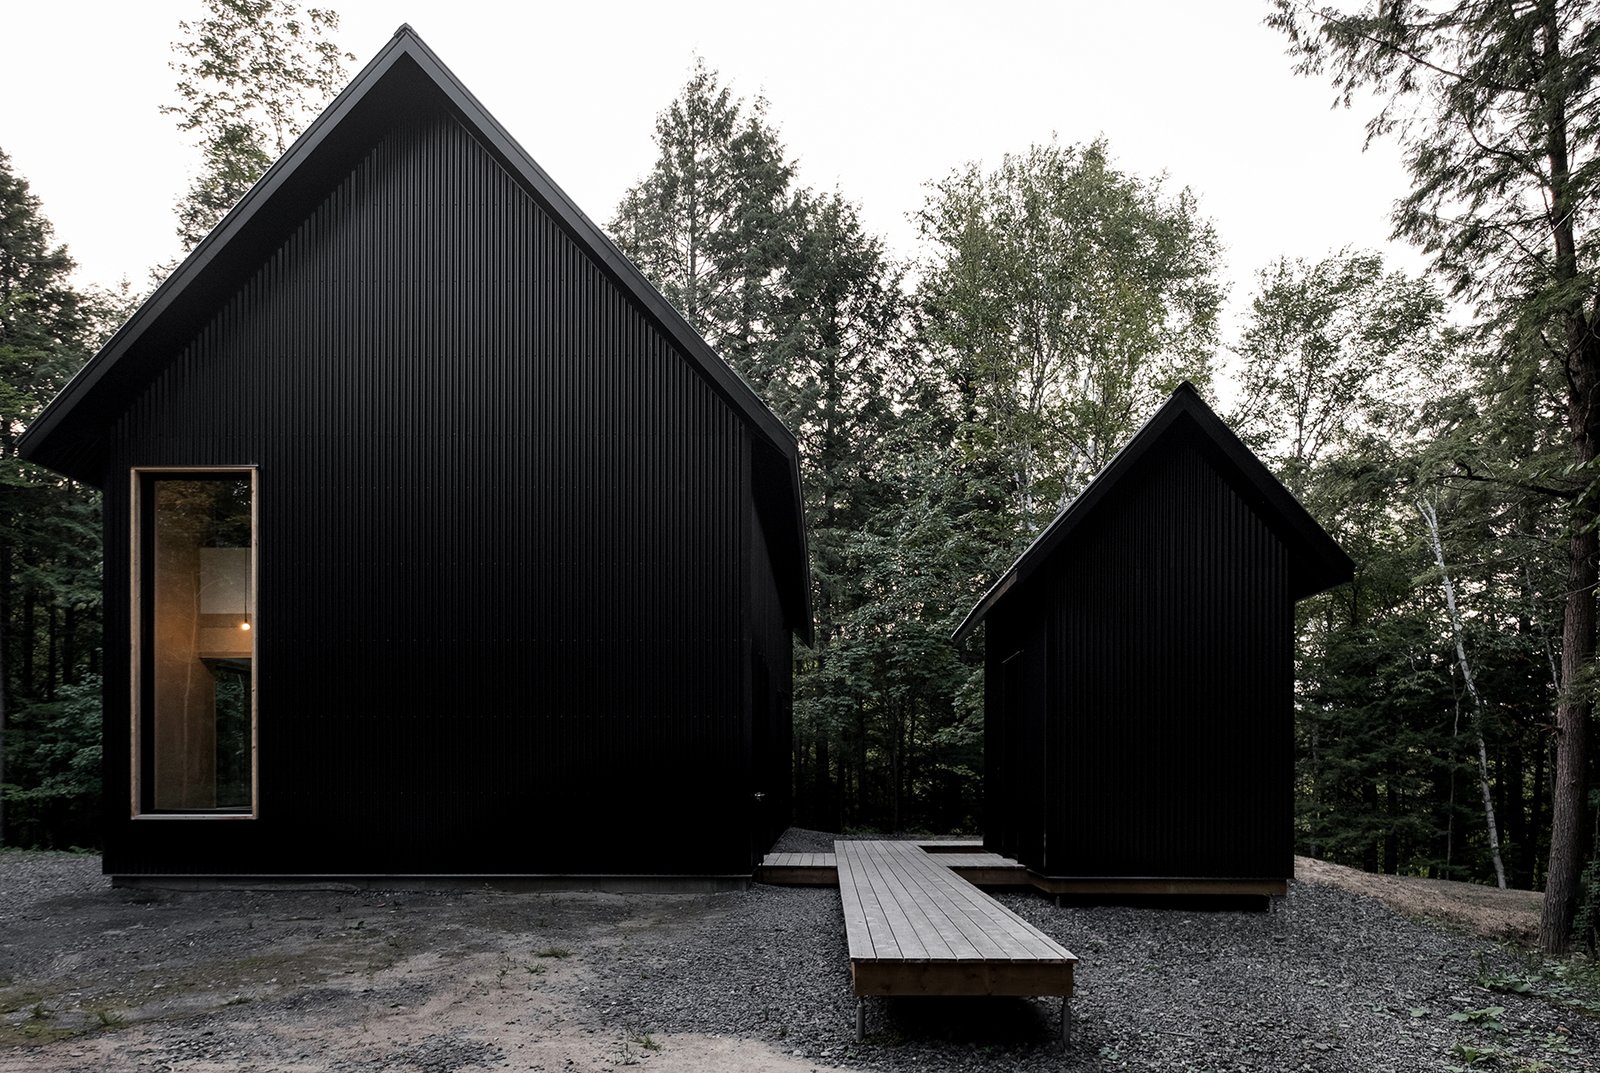 designed-by-montreal-based-practice-appareil-architecture-grand-pic-chalet-is-inspired-by-the-colors-and-vertical-lines-found-throughout-the-forest-around-the-property.jpg